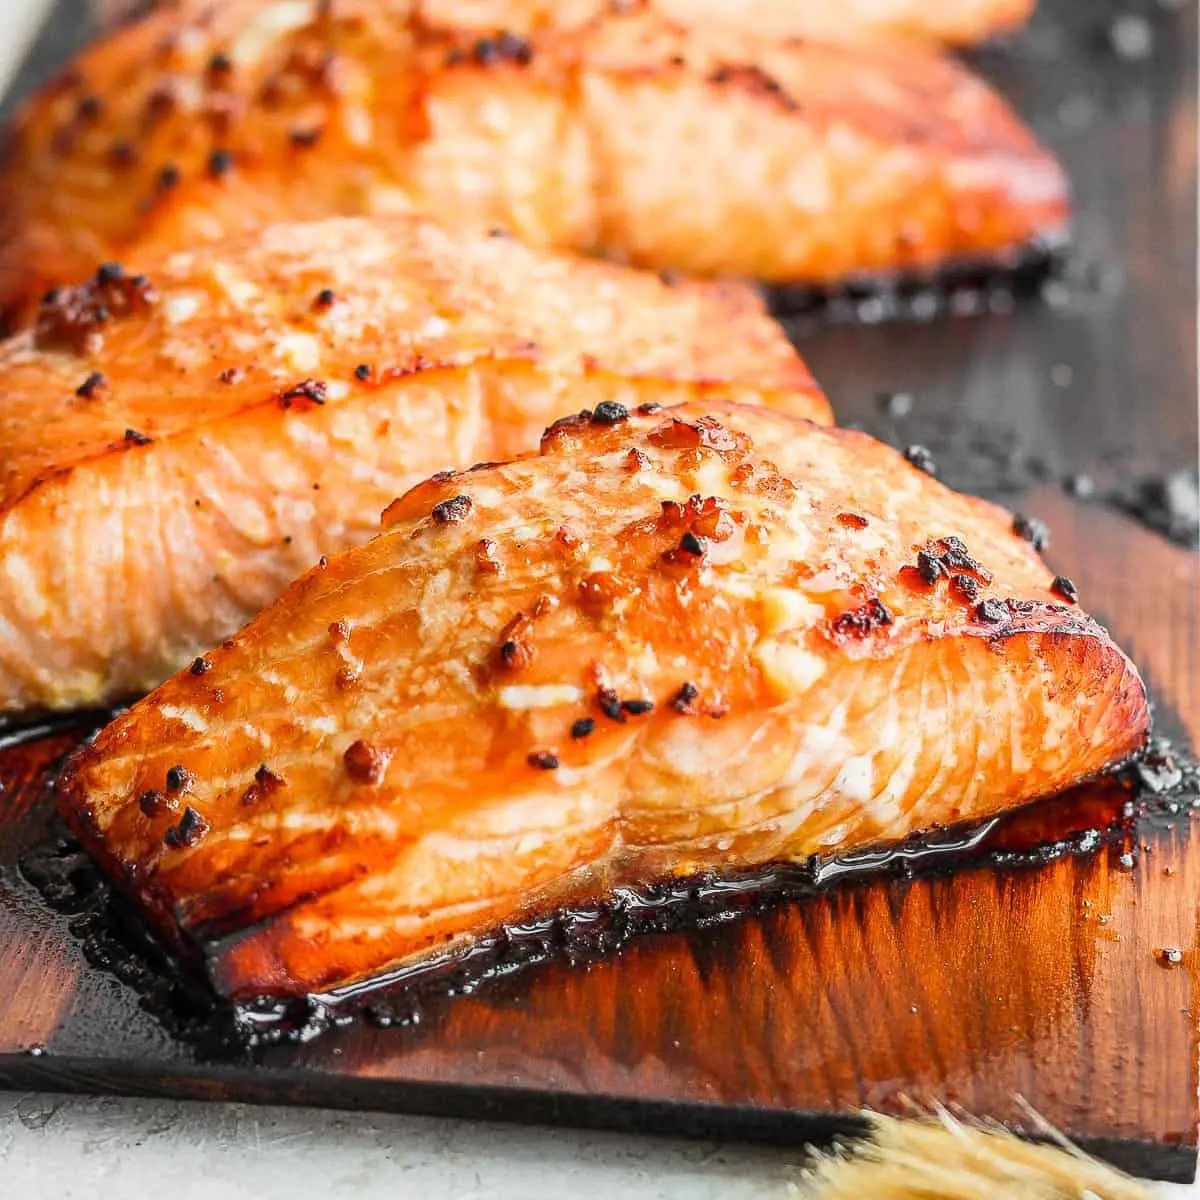 smoked salmon on wood plank - How do you smoke fish on a wooden plank